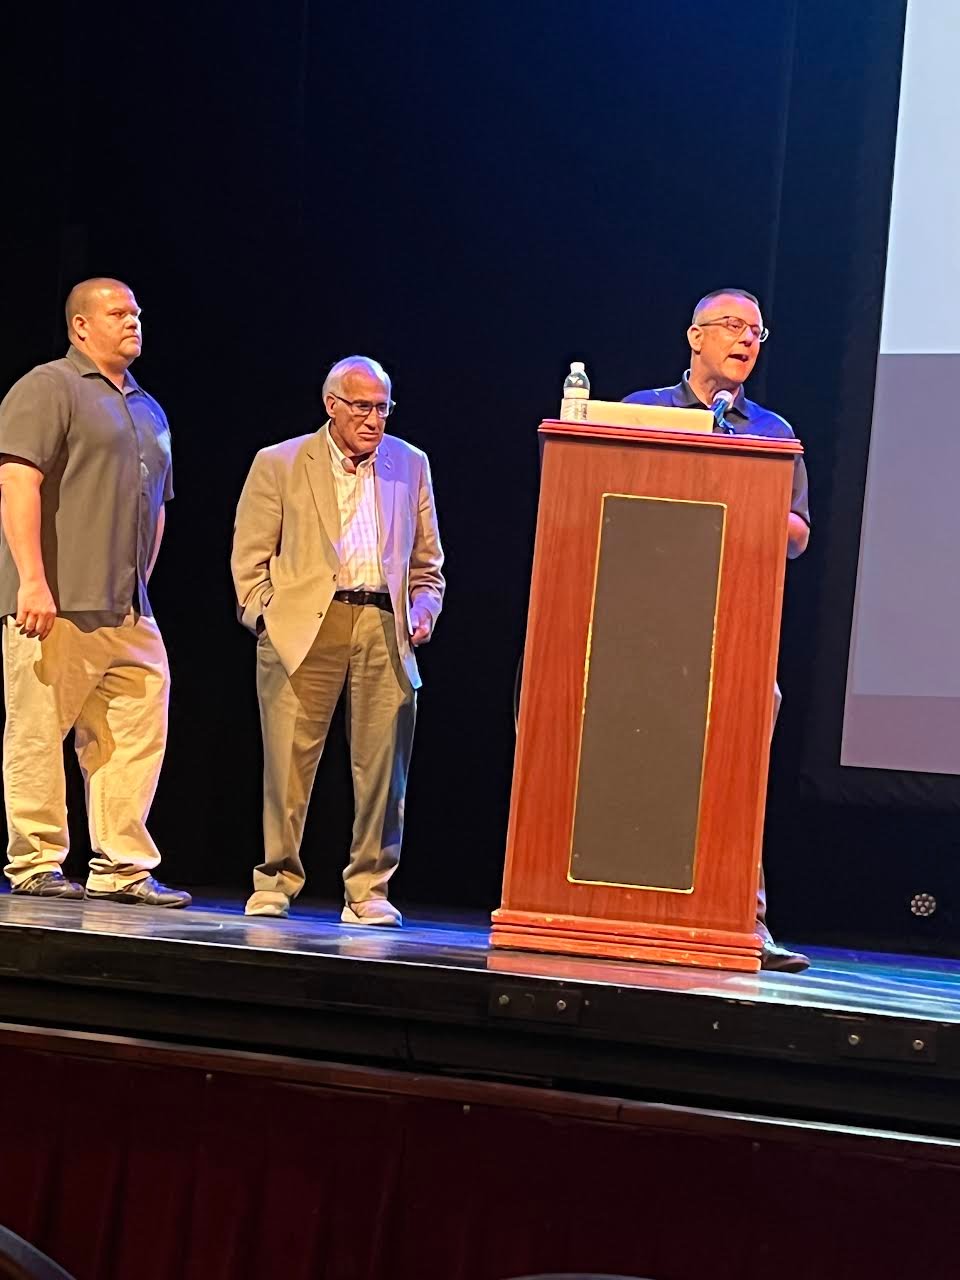 (Left to right) Timothy N. Nordberg, senior project engineer of Wastewater at H2M architects + engineers, stands alongside Patchogue Village mayor Paul Pontieri and Legis. Dominick Thorne while speaking to the audience about their support for the new sewer project in the village.